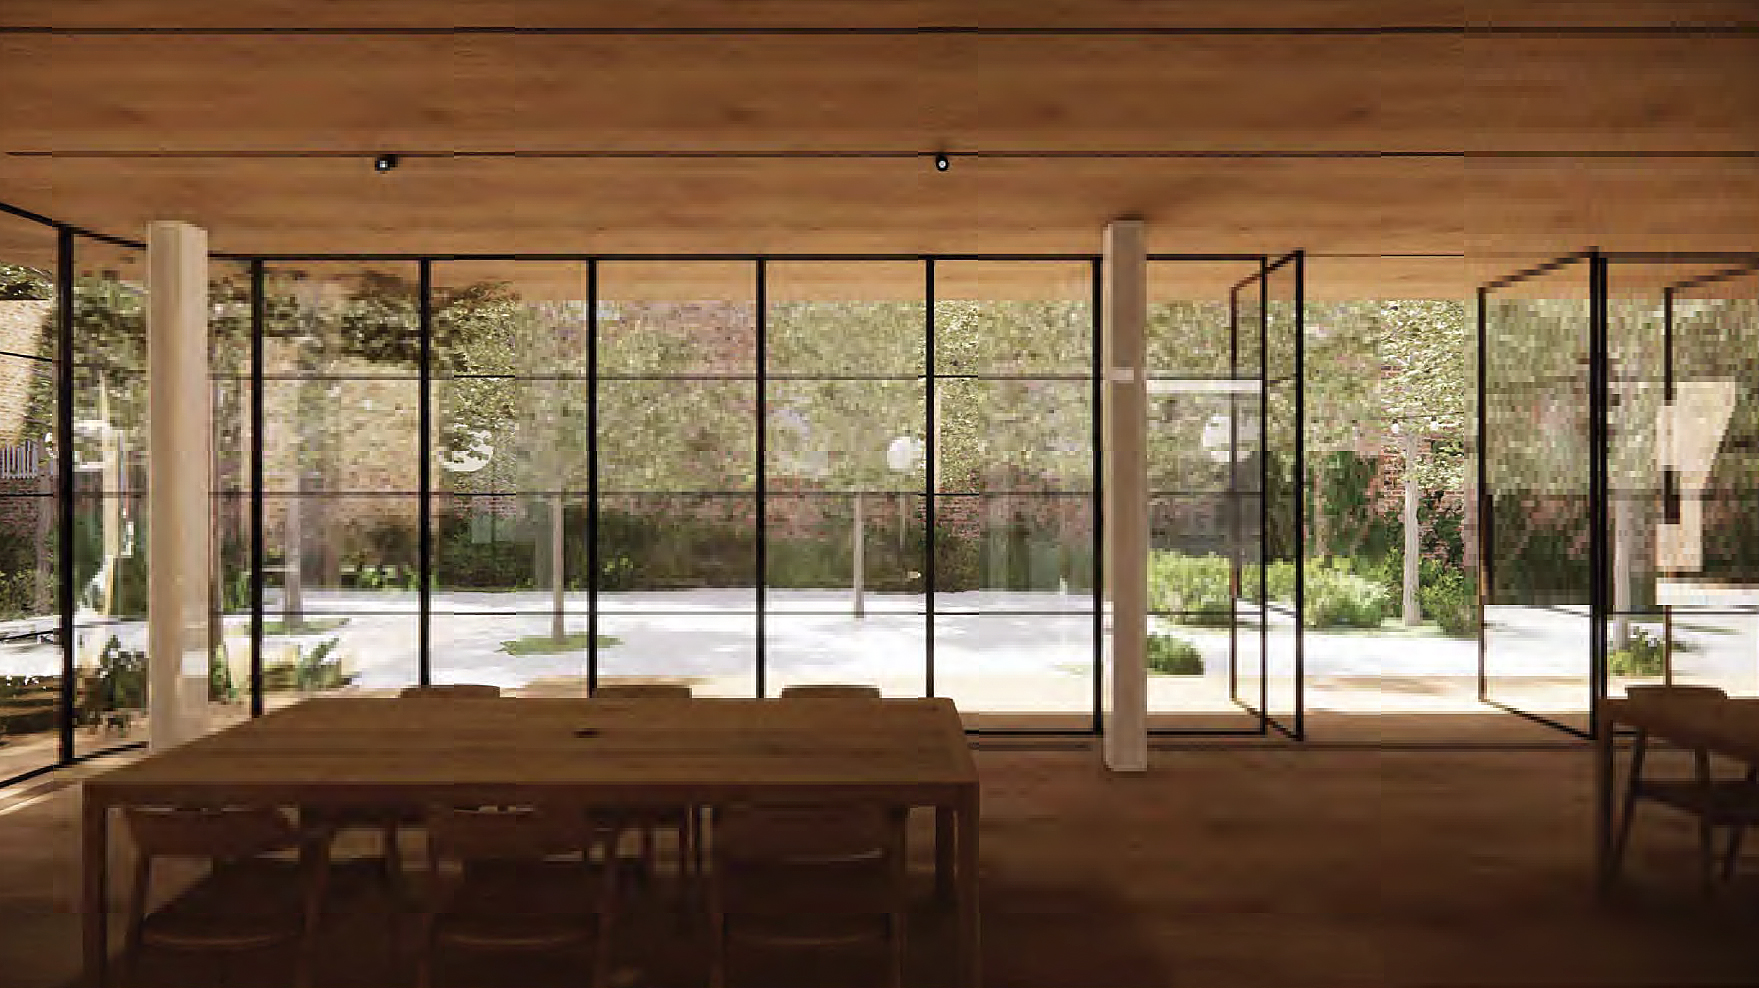 Inside a modern room with large glass windows overlooking a courtyard with trees and a paved area.